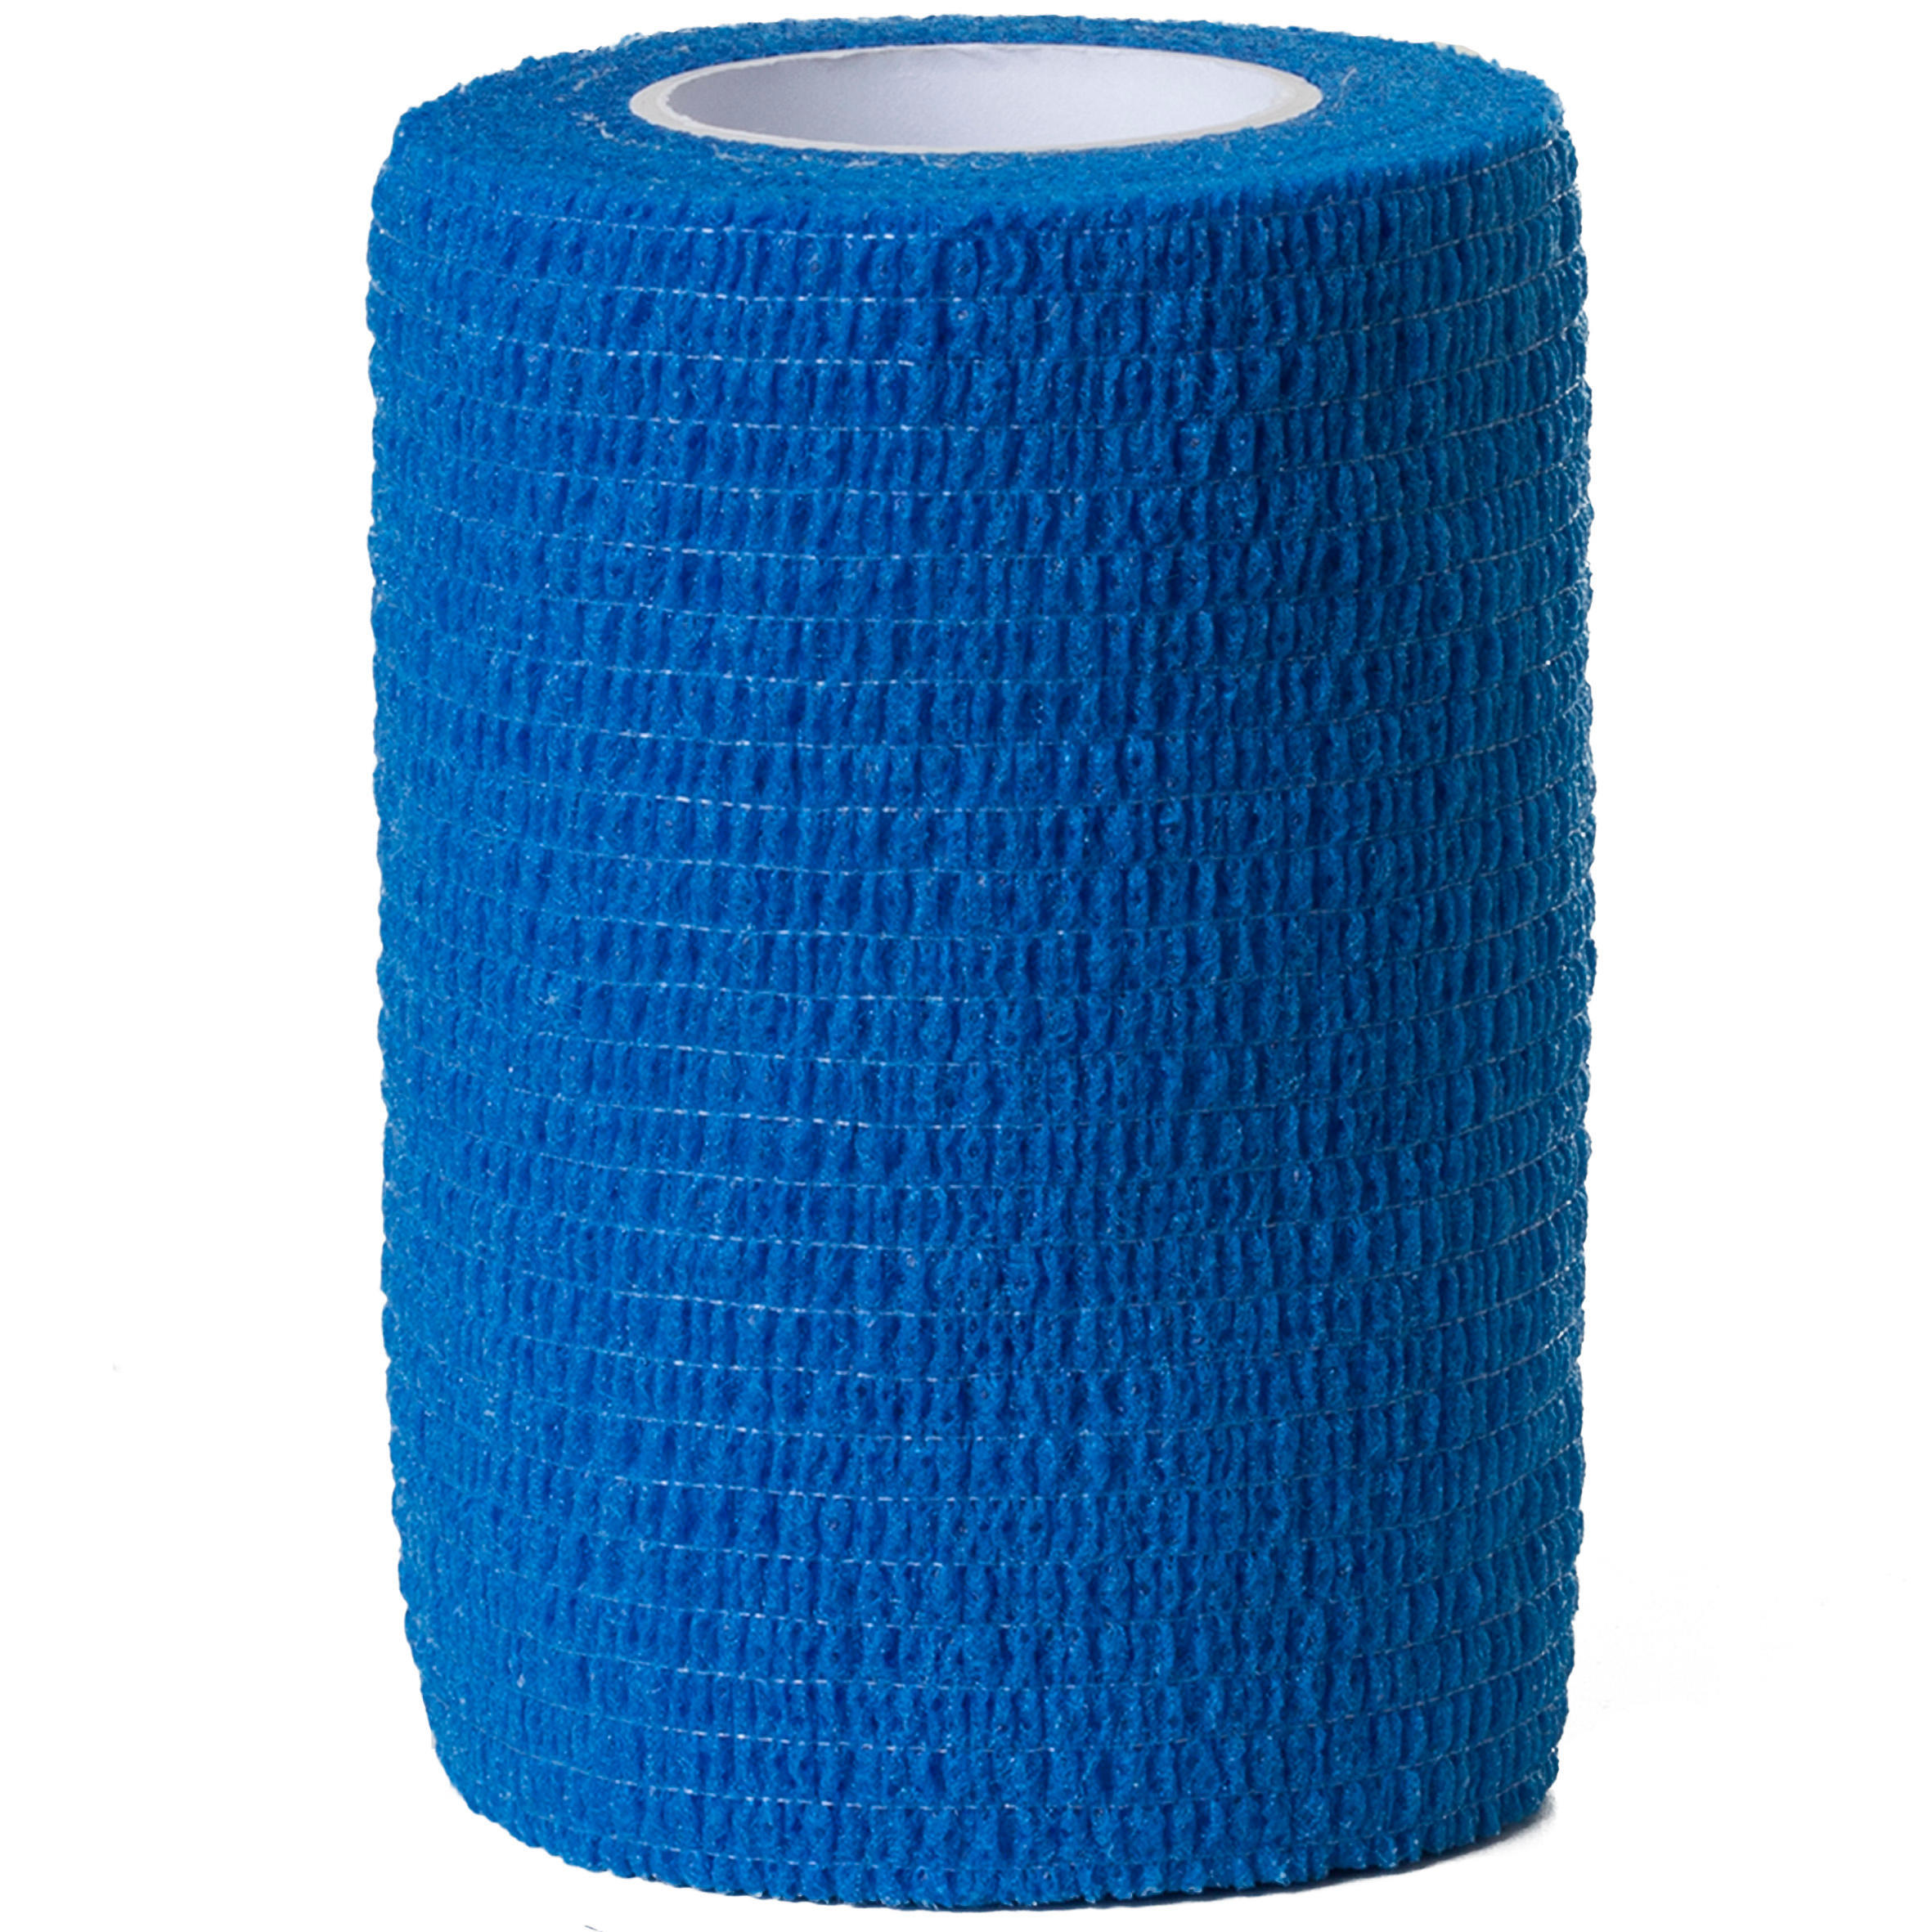 7.5 cm x 4.5 m Movable Self-Adhesive Supportive Wrap - Blue 2/2